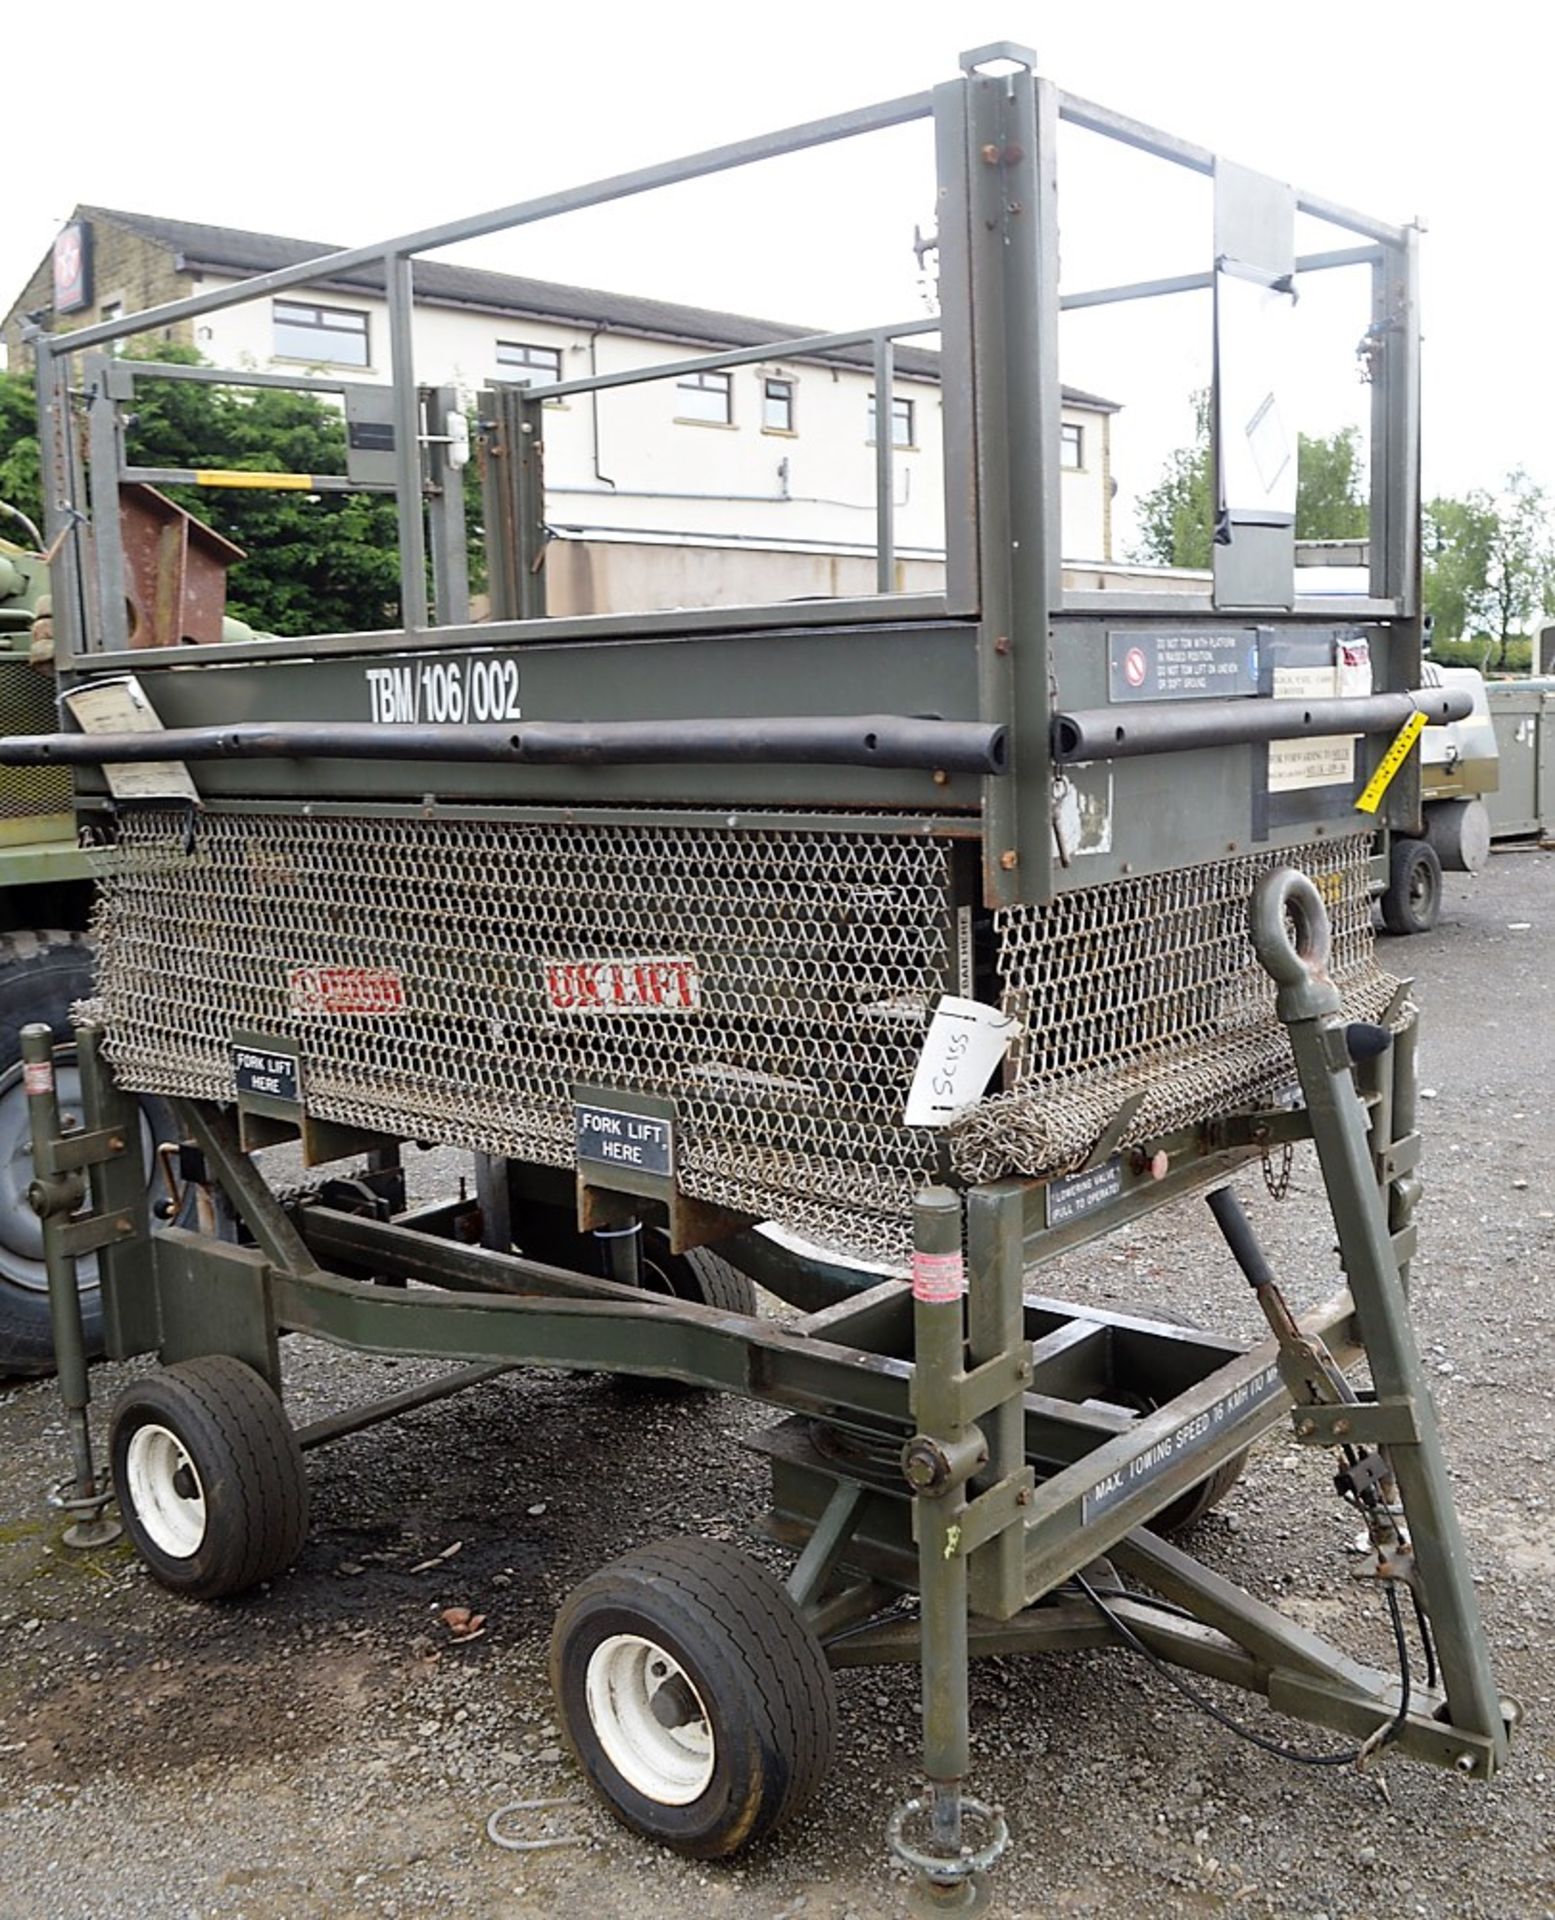 UK Lift manual hydraulic site tow mobile access platform (Ex MOD) - Image 2 of 5